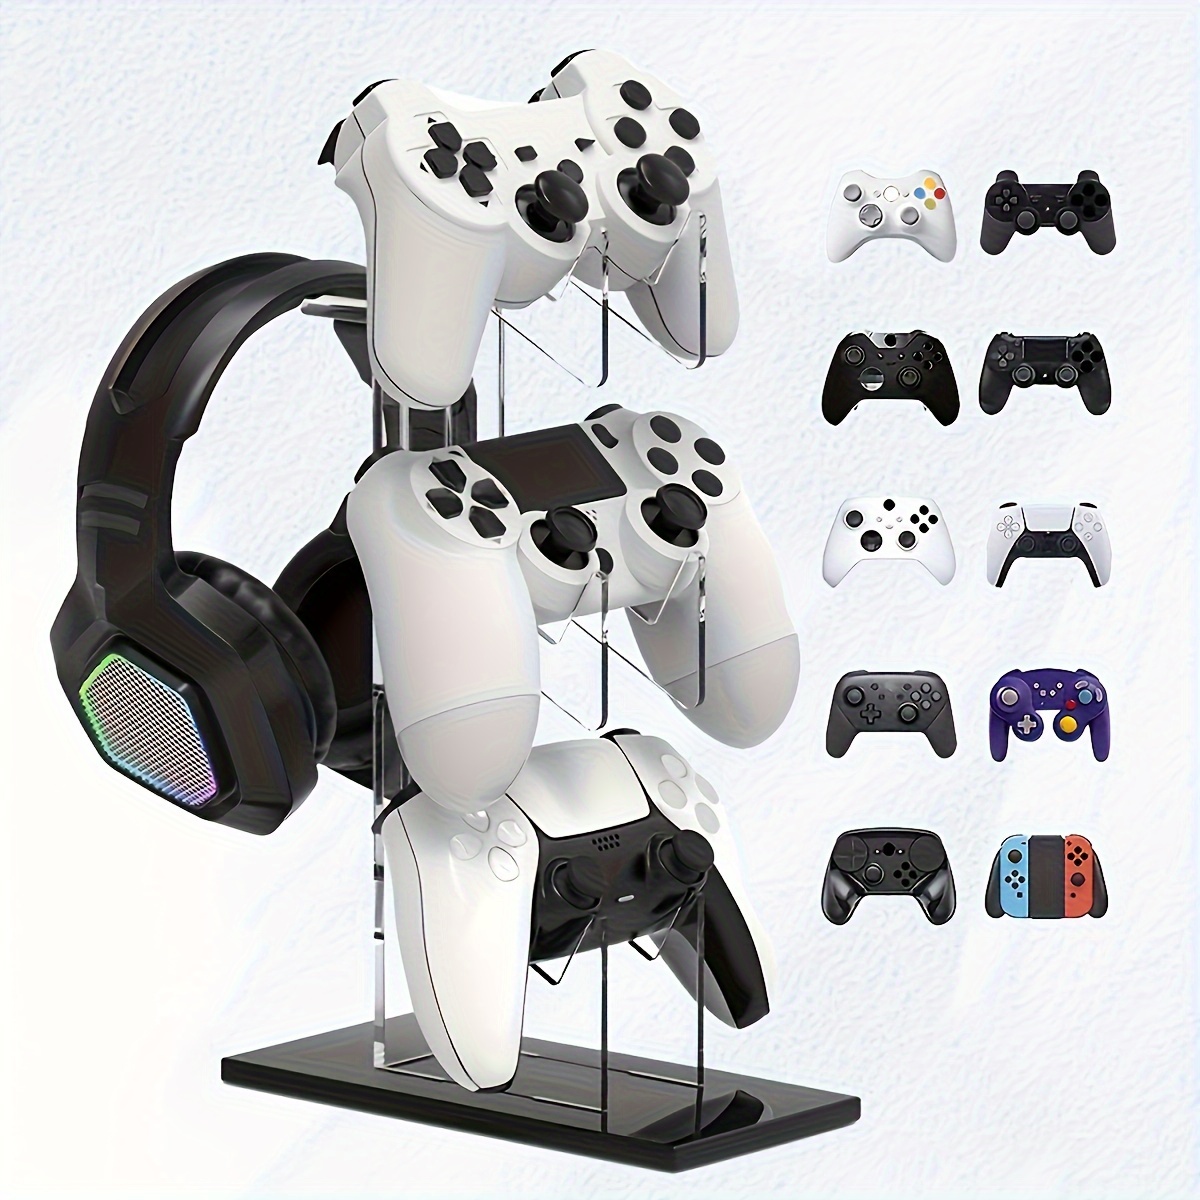 

Acrylic 3-layer Universal Gaming Controller Stand With Headphone Holder For Ps5 Ps4 Nintendo Switch - Durable Game Accessory Organizer Without Battery